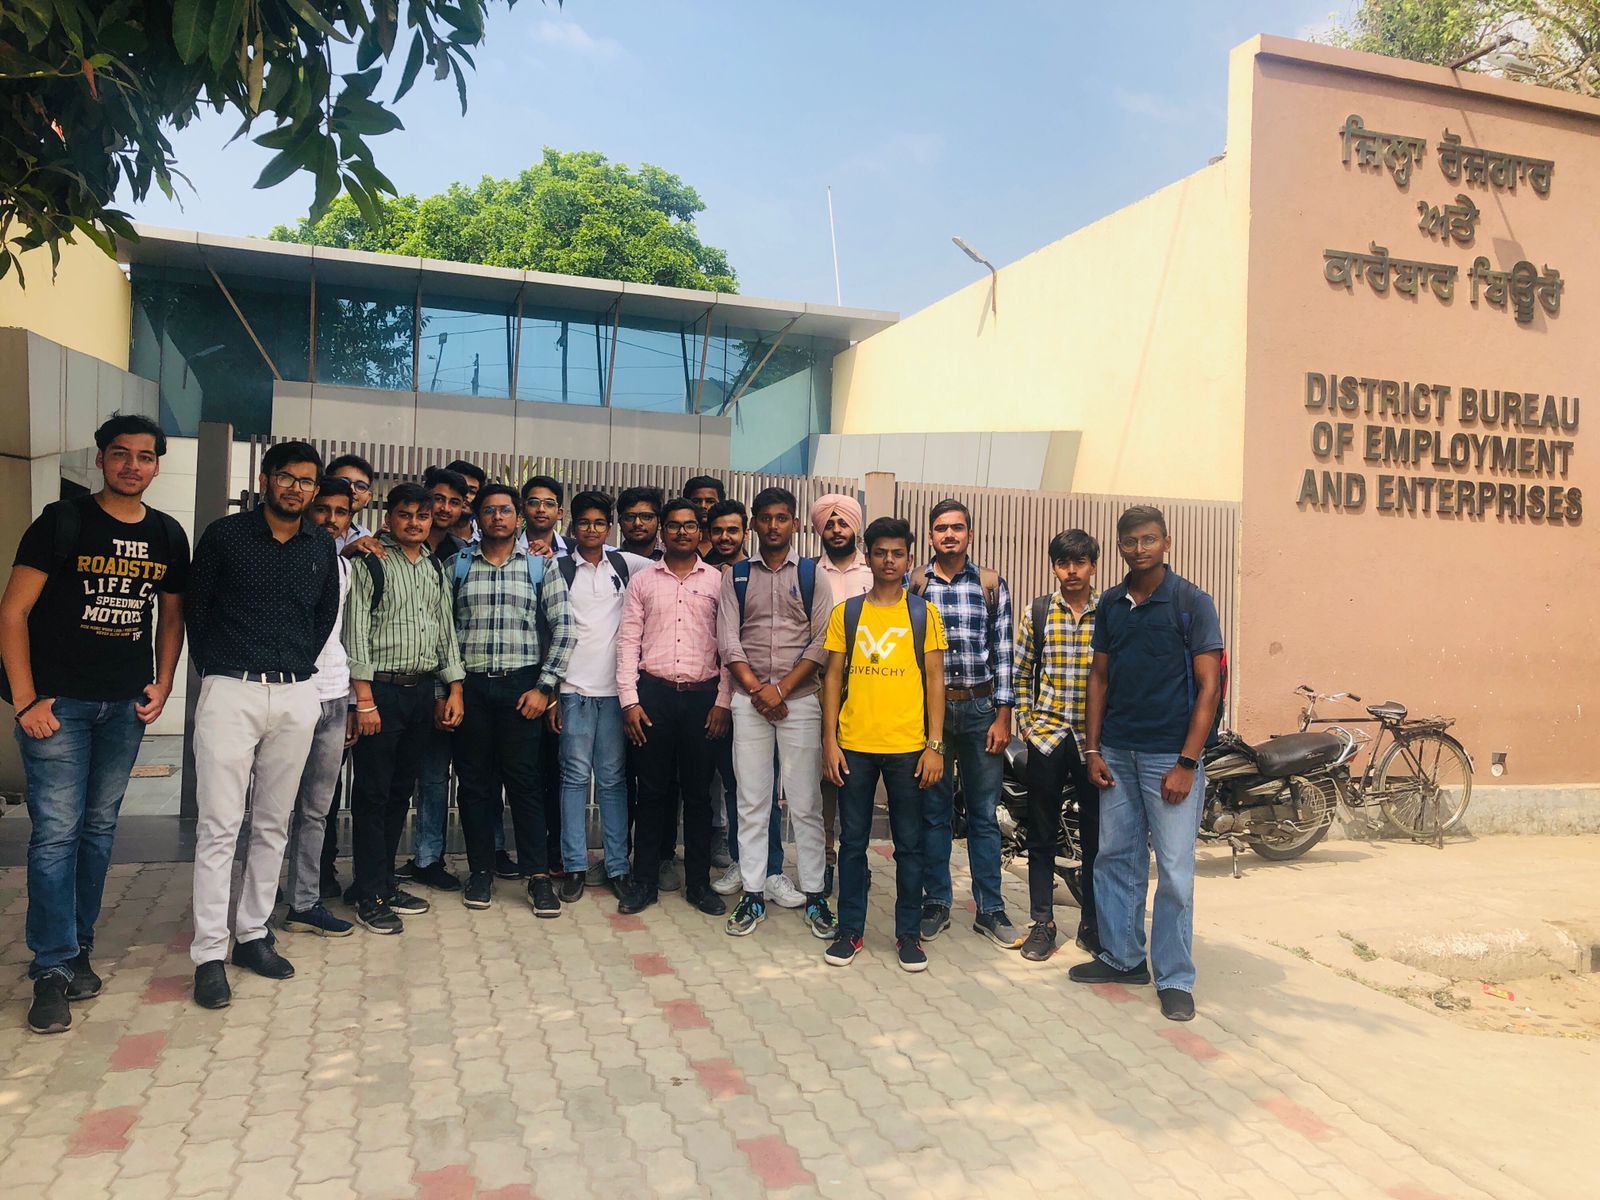 Students of Arya college Ludhiana visited  DBEE